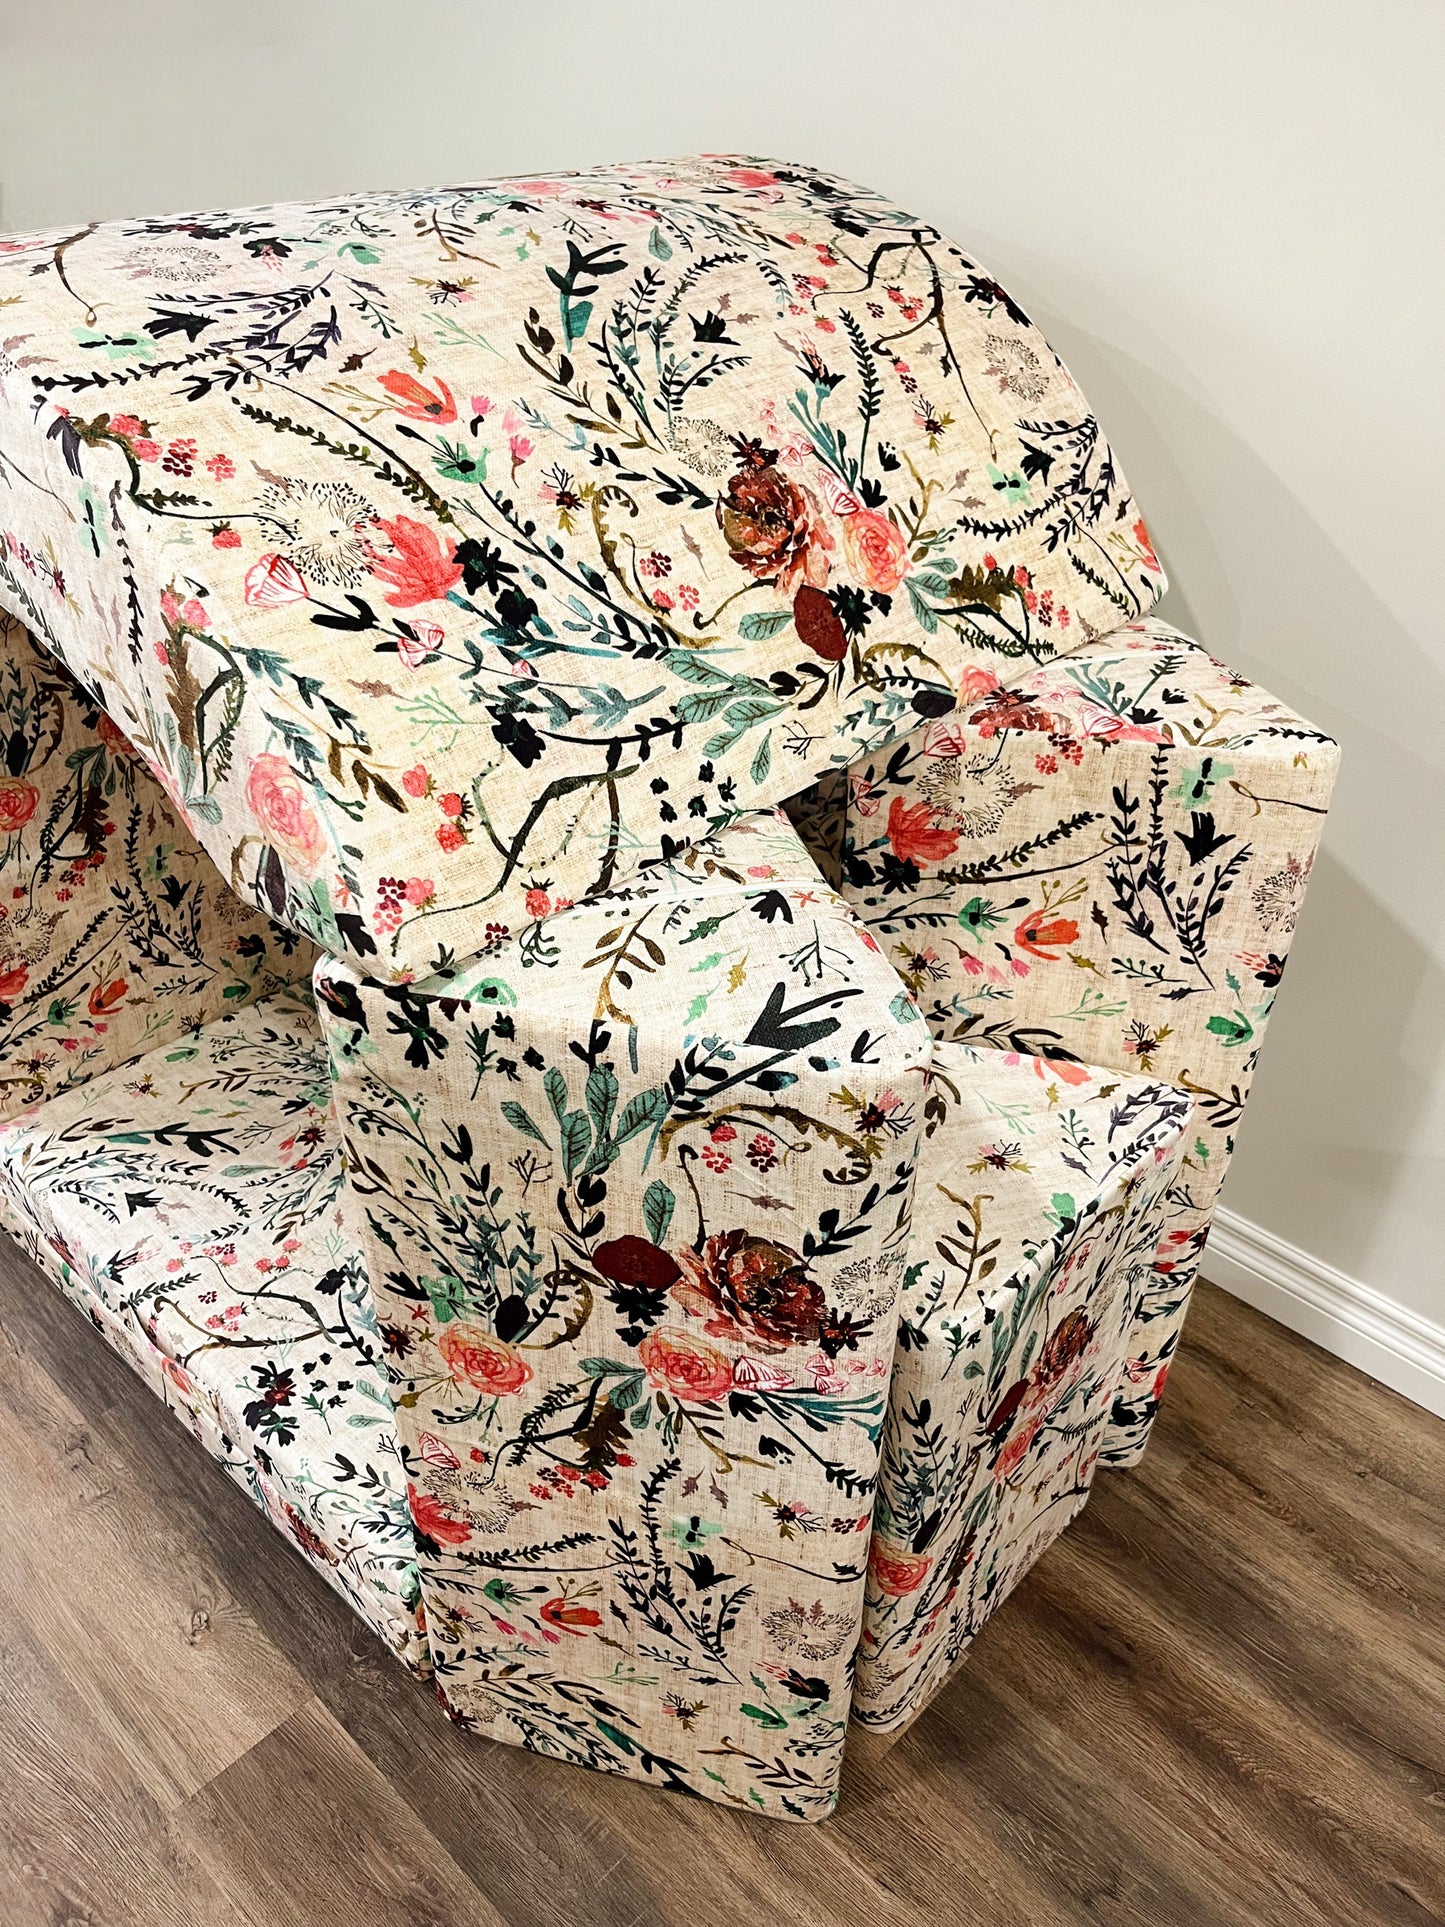 Playcouch Covers - Fable Floral